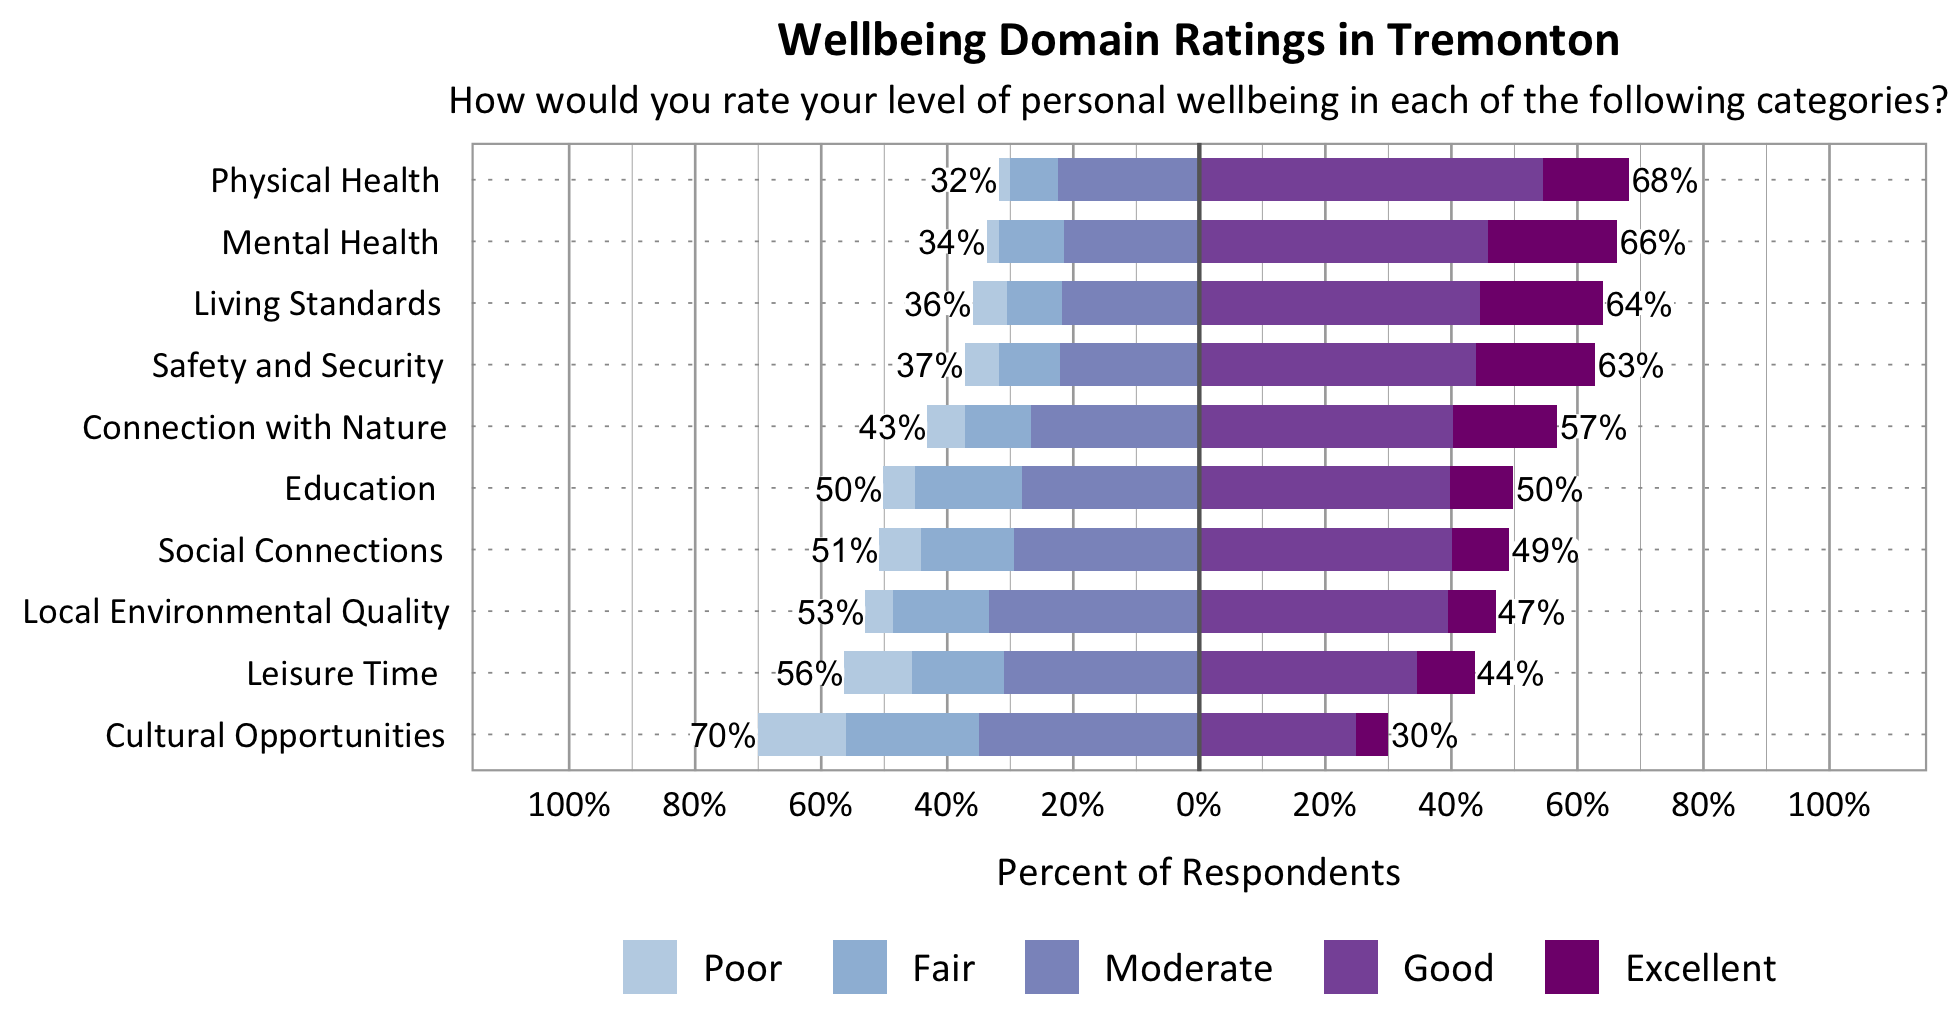 Likert Graph. Title: Wellbeing Domain Ratings in Tremonton. Subtitle: How would you rate your level of personal wellbeing in each of the following categories? Category: Safety and Security - 37% of respondents rated as poor, fair, or moderate while 63% rated as good or excellent; Category: Connection with Nature - 43% of respondents rated as poor, fair, or moderate while 57% rated as good or excellent; Category: Local Environmental Quality- 53% of respondents rated as poor, fair, or moderate while 47% rated as good or excellent; Category: Education - 50% of respondents rated as poor, fair, or moderate while 50% rated as good or excellent; Category: Living Standards - 36% of respondents rated as poor, fair, or moderate while 64% rated as good or excellent; Category: Mental Health - 34% of respondents rated as poor, fair, or moderate while 66% rated as good or excellent; Category: Leisure Time - 56% of respondents rated as poor, fair or moderate while 44% rated as good or excellent; Category: Physical Health - 32% of respondents rated as poor, fair, or moderate while 68% rated as good or excellent; Category: Social Connections - 51% of respondents rated as poor, fair, or moderate while 49% rated as good or excellent; Category: Cultural Opportunities - 70% of respondents rated as poor, fair or moderate while 30% rated as good or excellent.